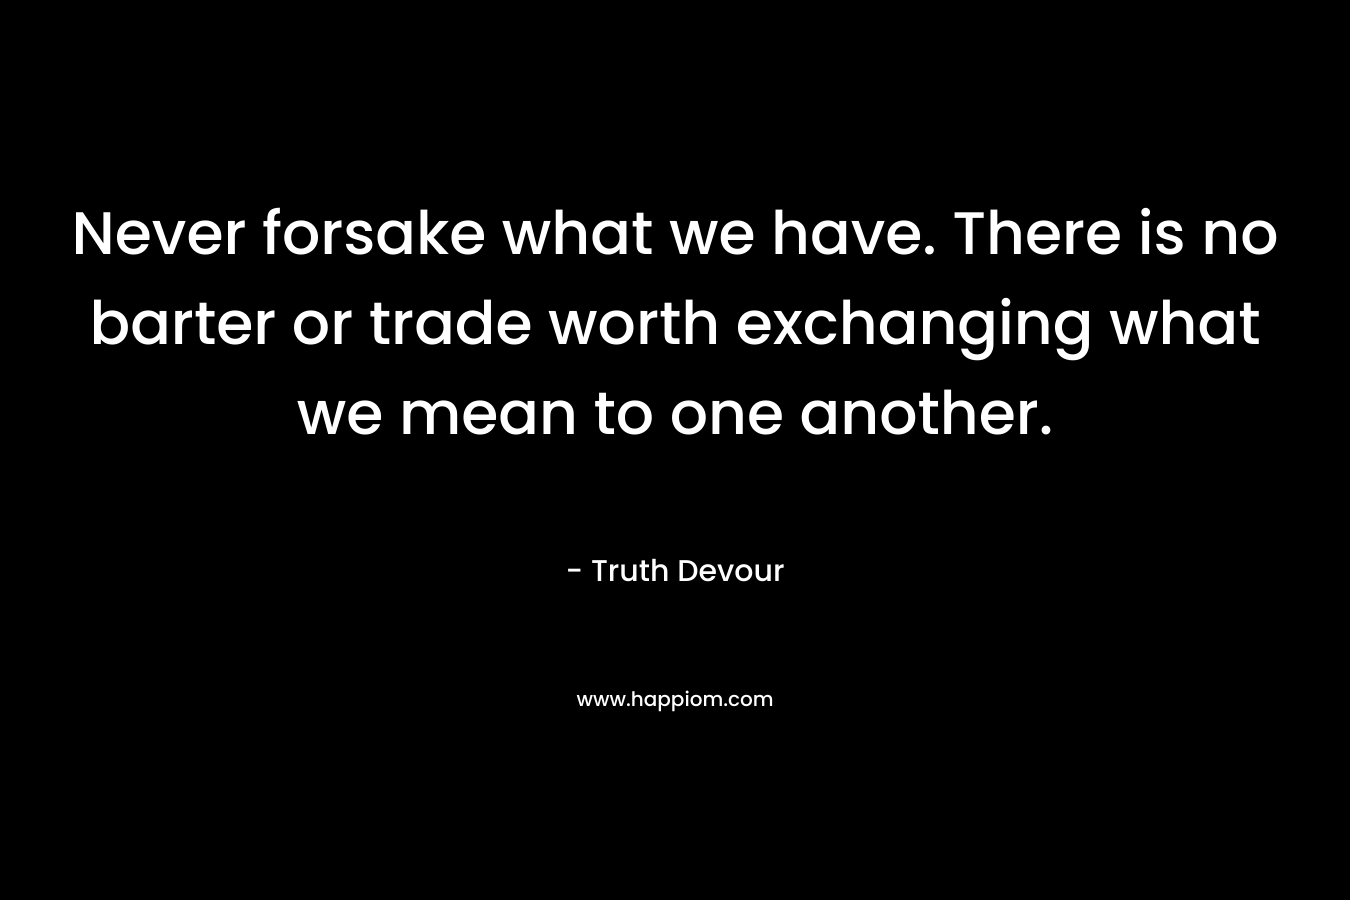 Never forsake what we have. There is no barter or trade worth exchanging what we mean to one another.